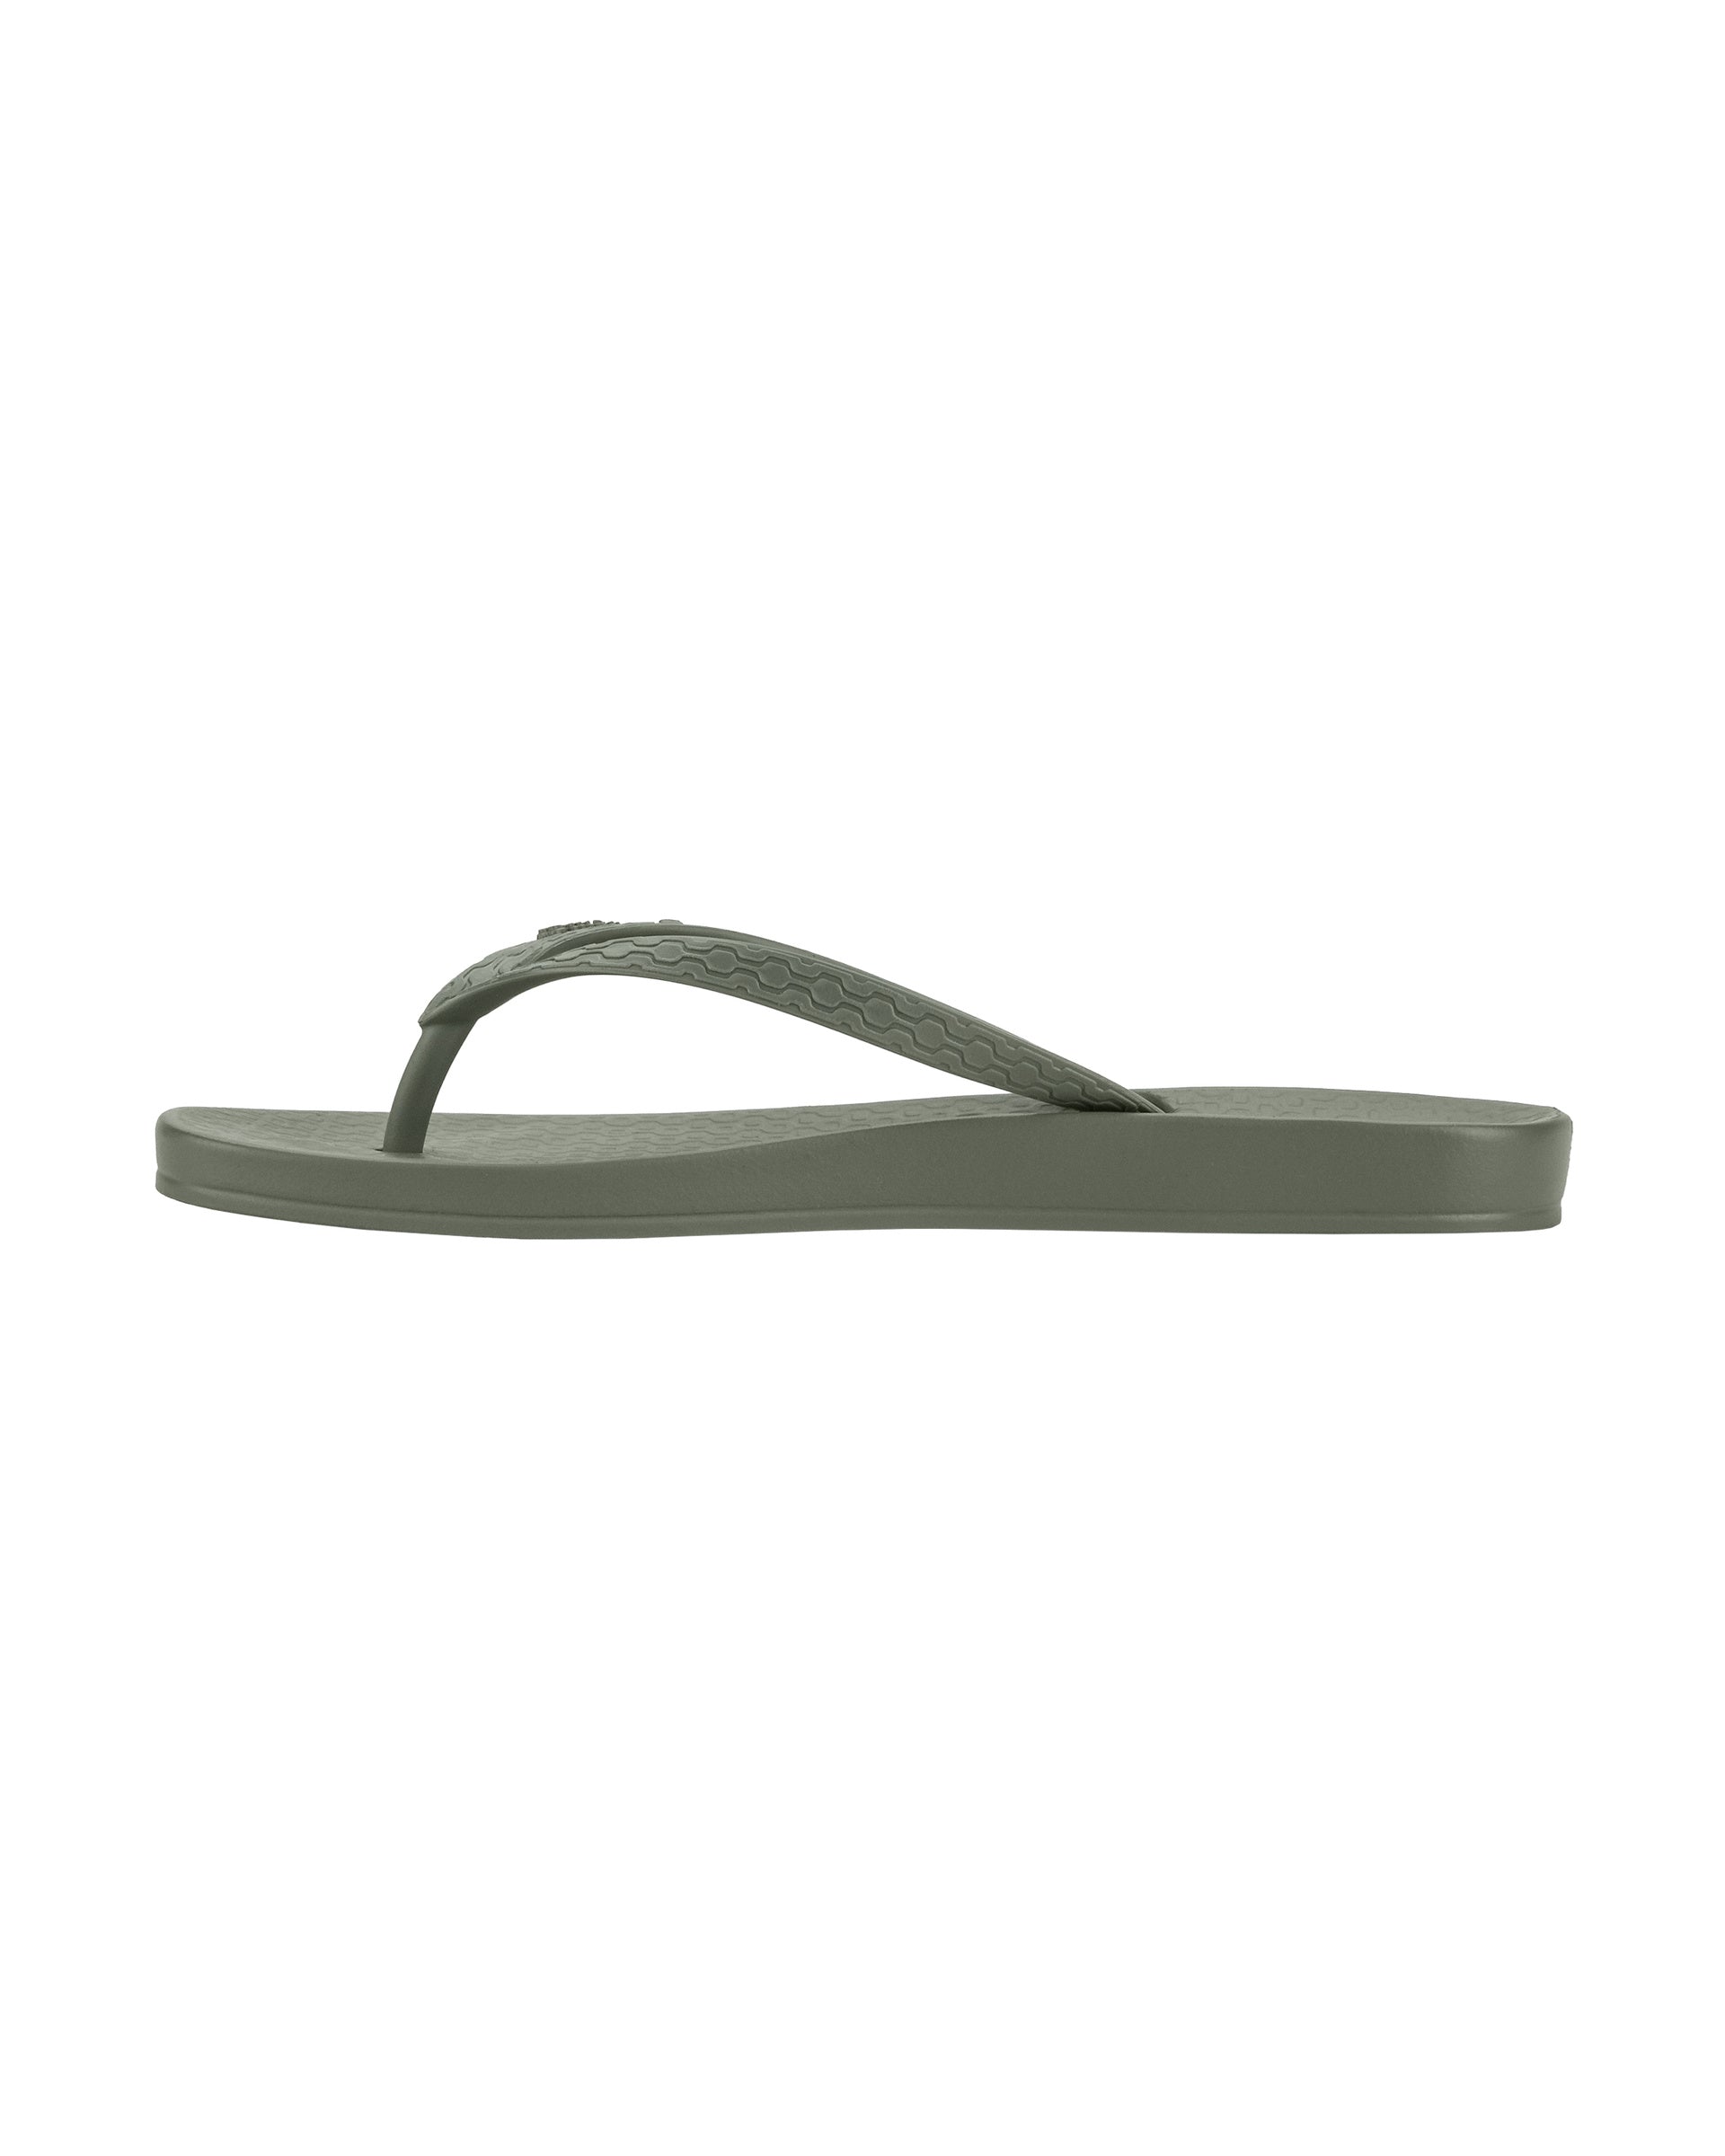 Inner side view of a green Ipanema Ana Colors women's flip flop.